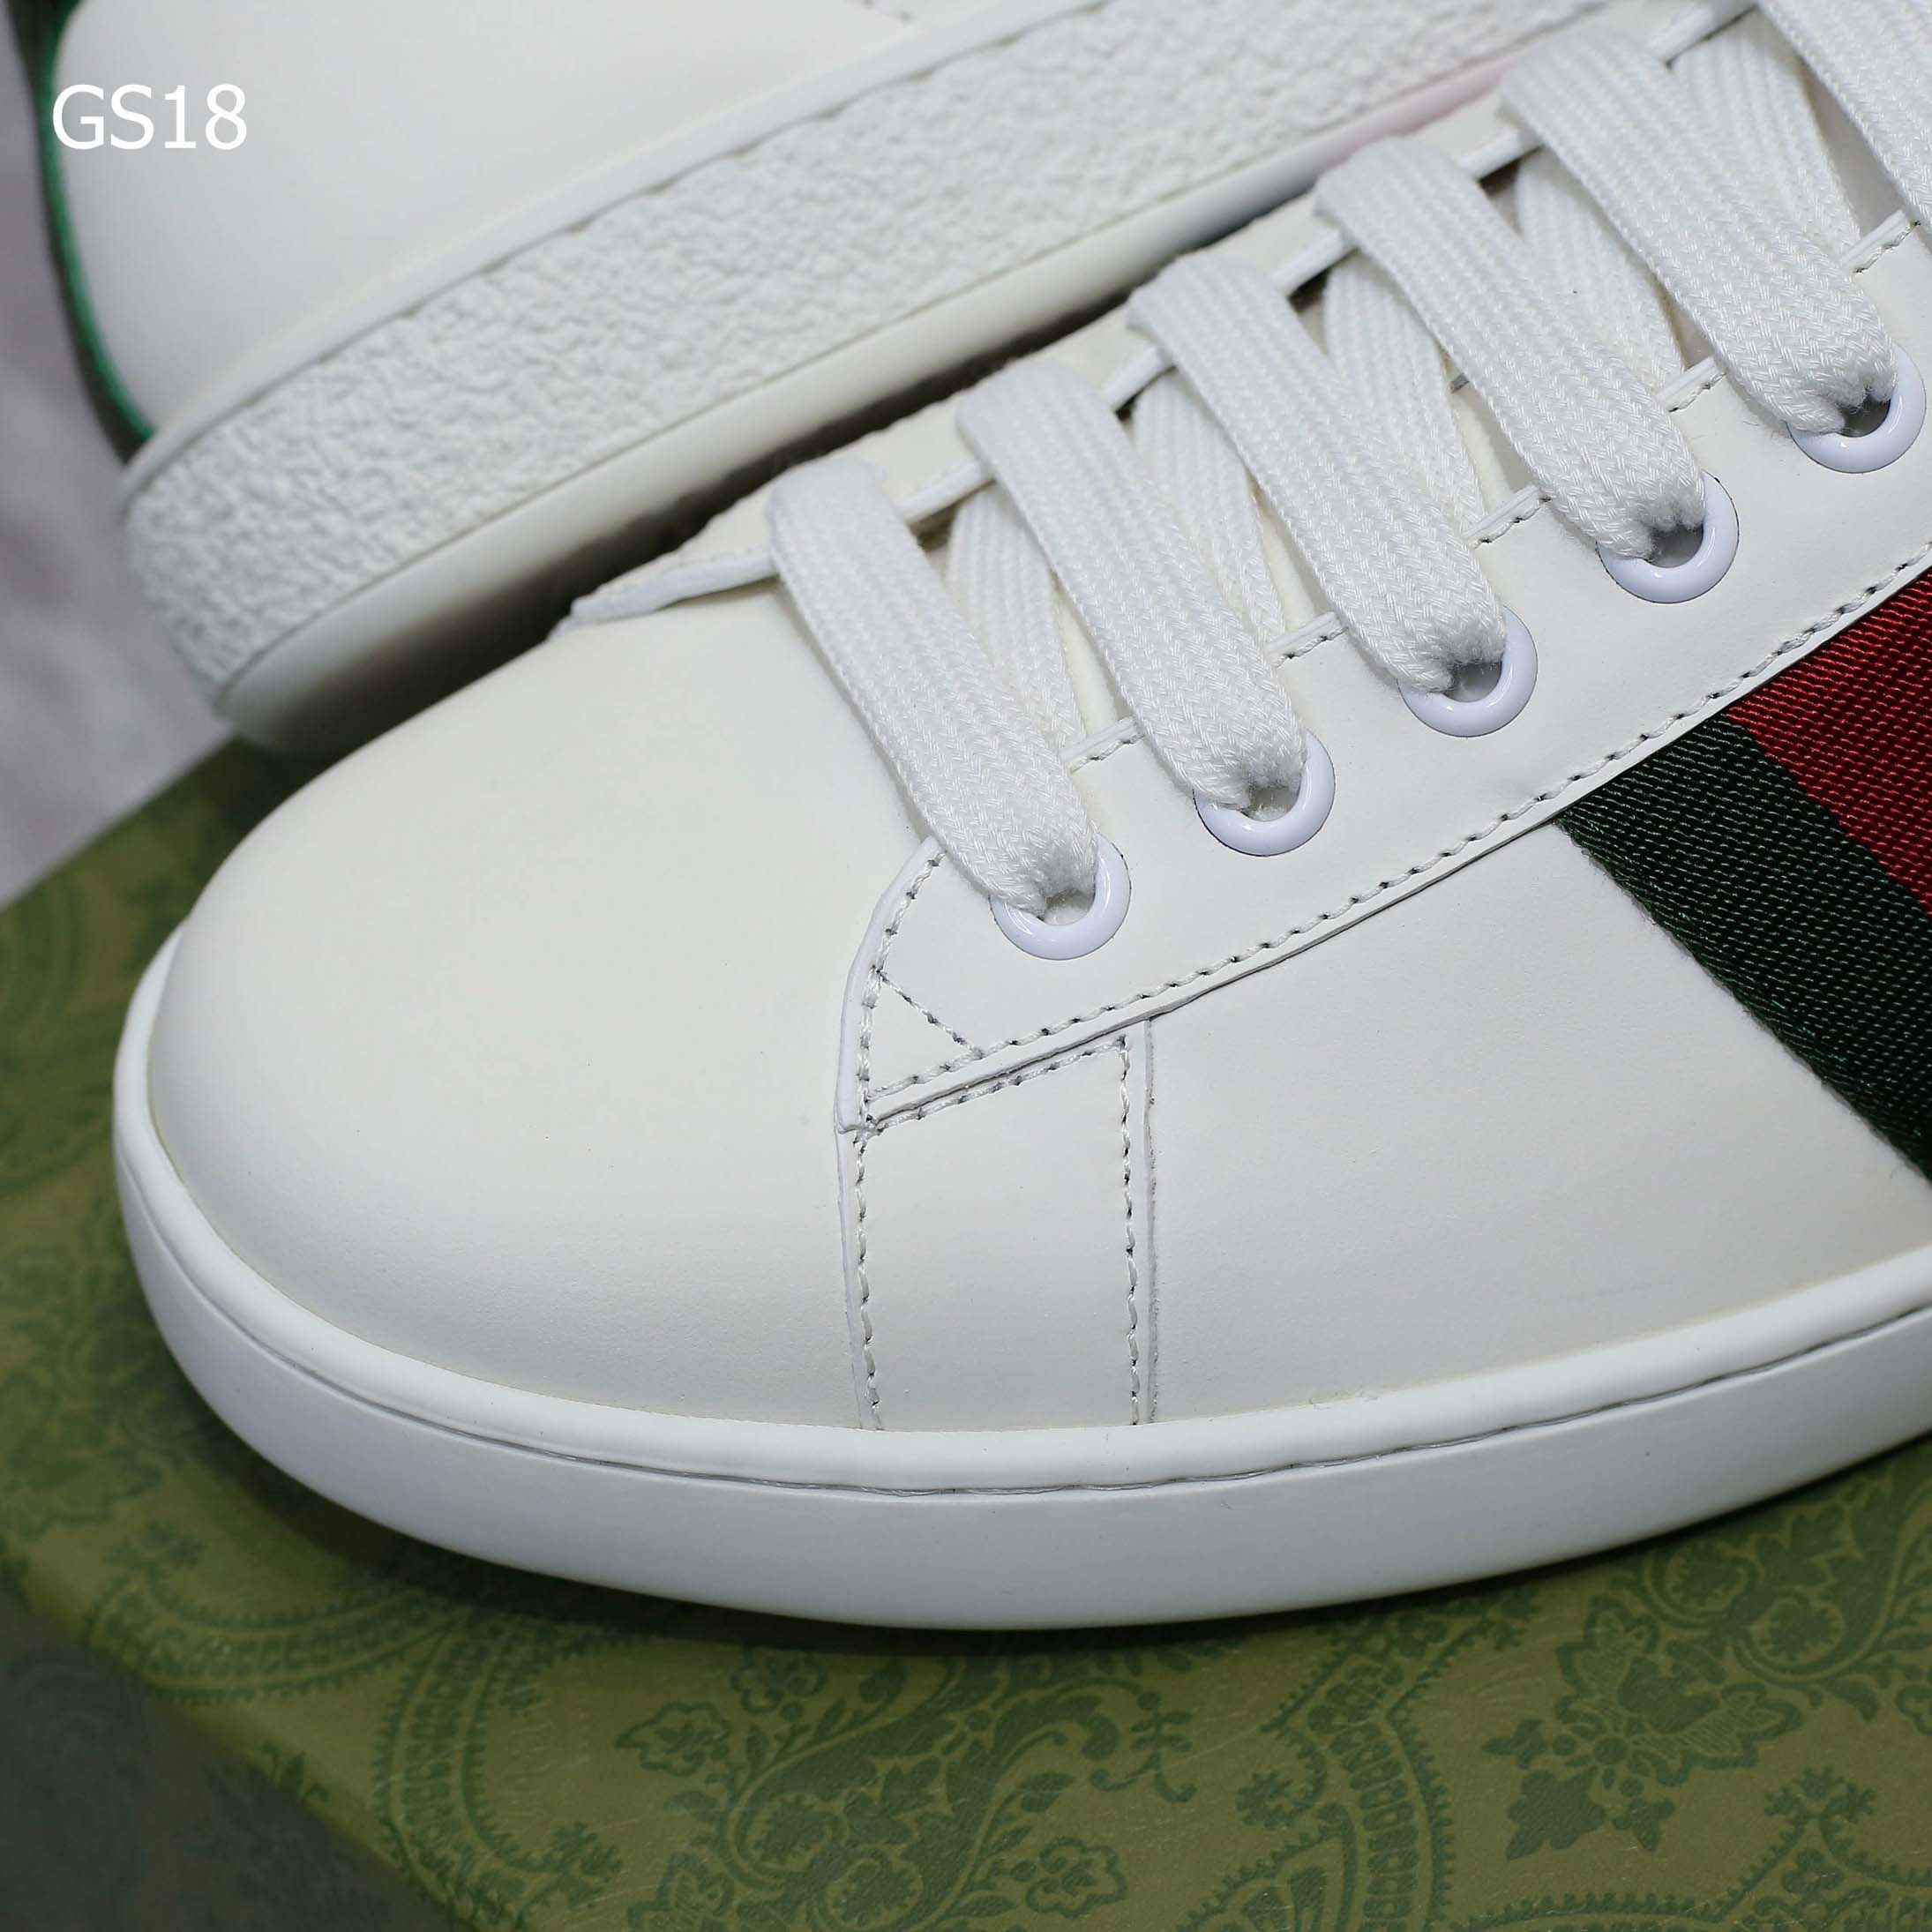 Gucci Ace Leather Sneaker With Green Crocodile